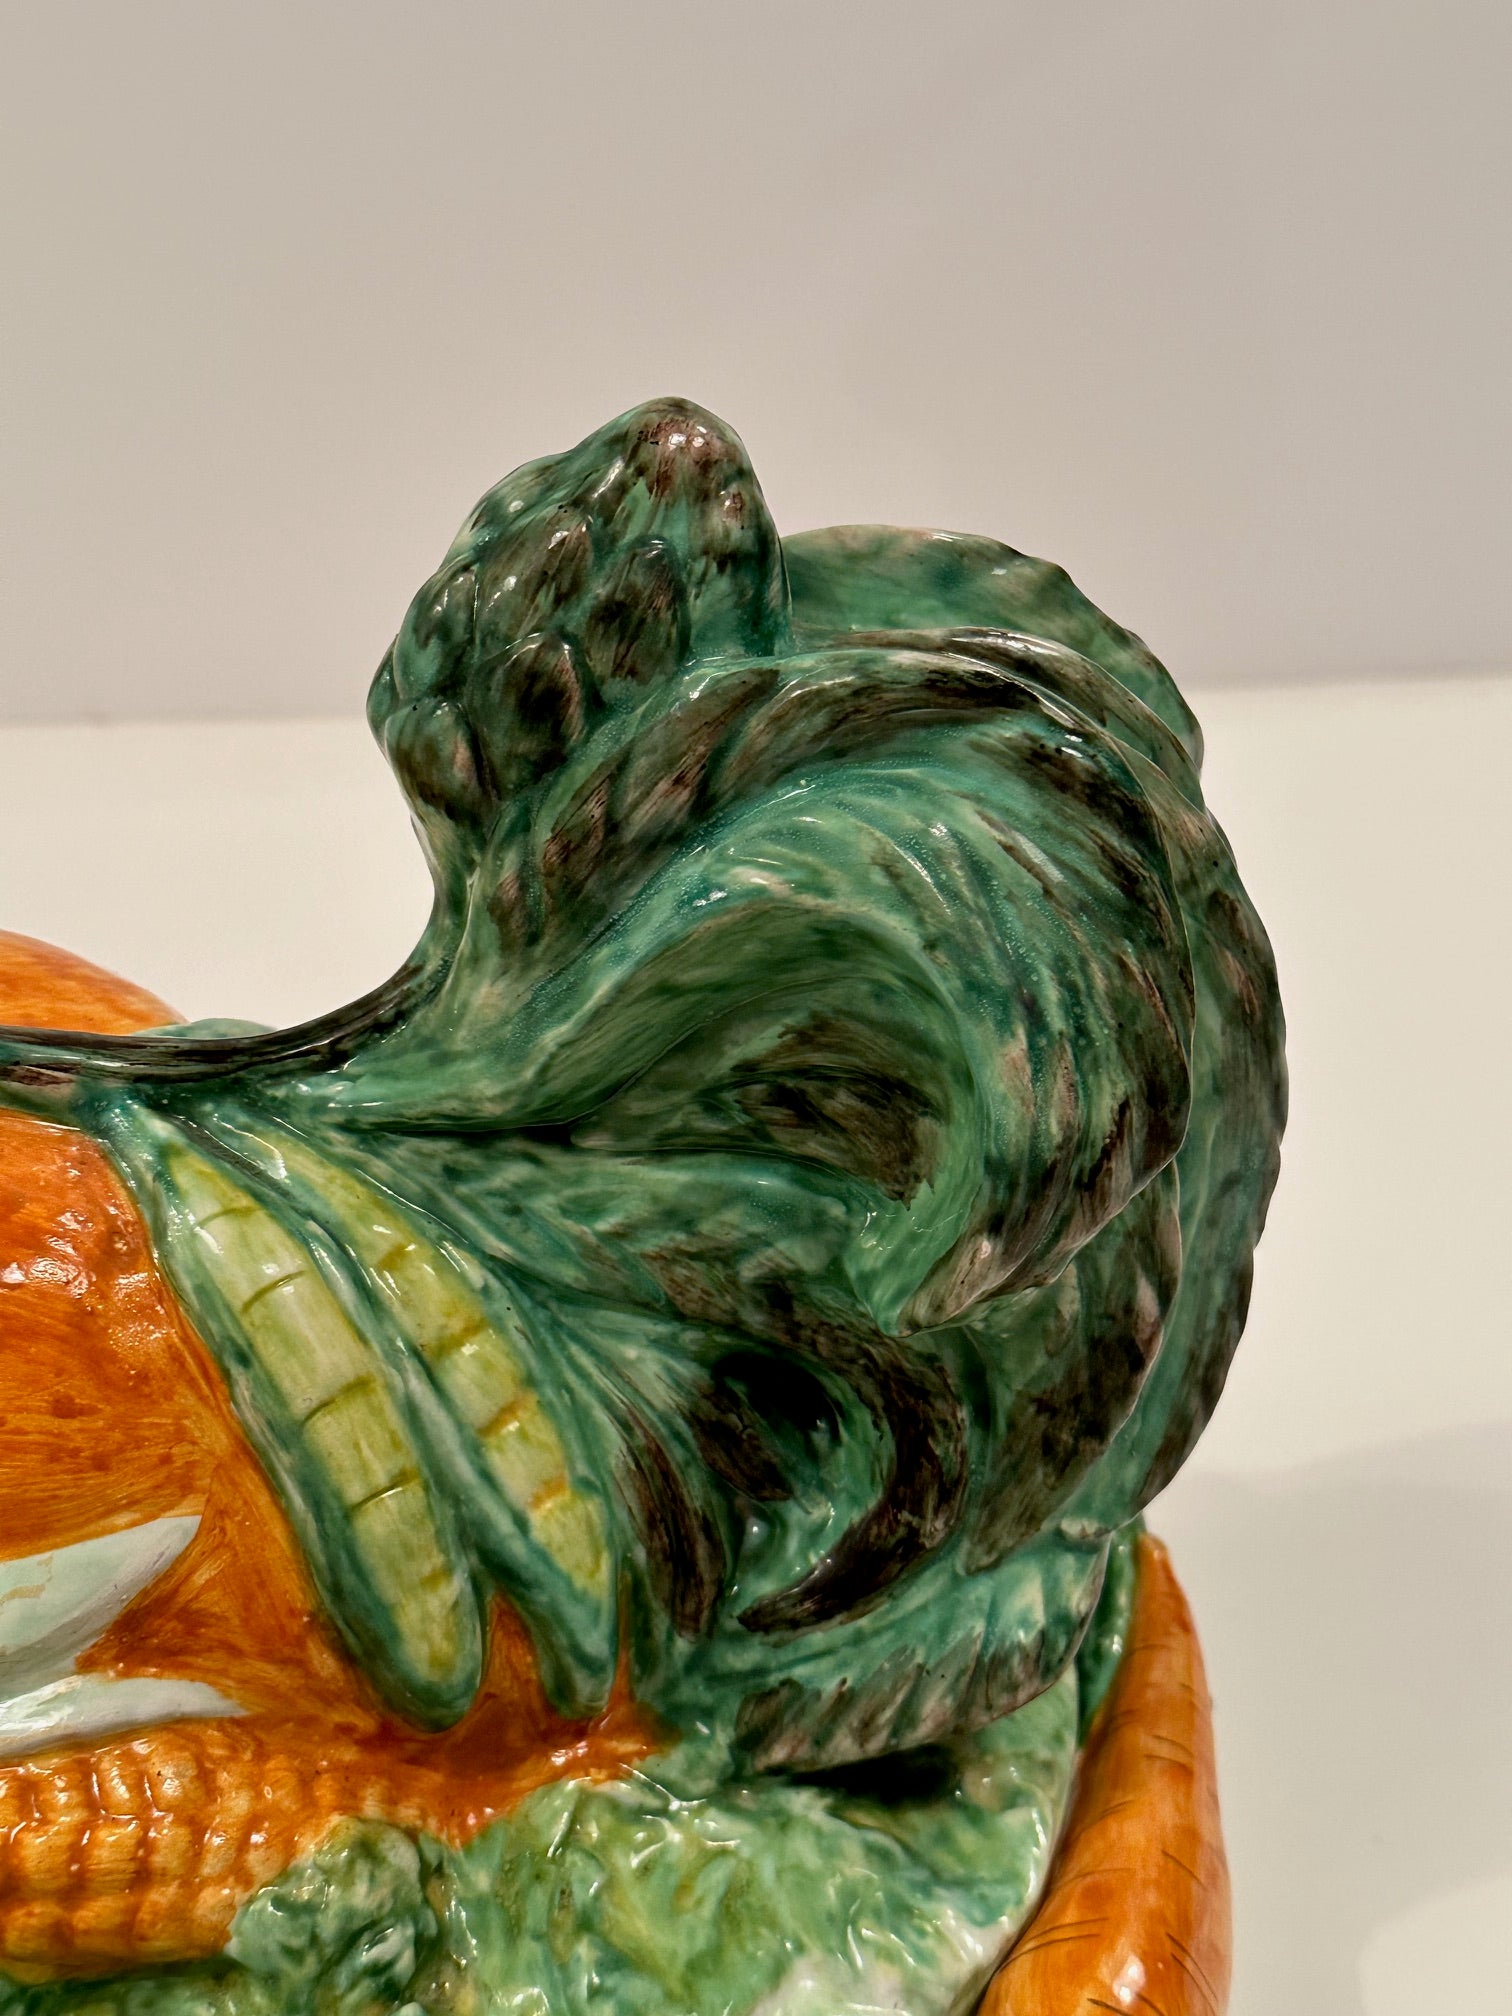 Wonderfully decorative hand painted ceramic Italian rooster tureen encrusted with vegetables.
2